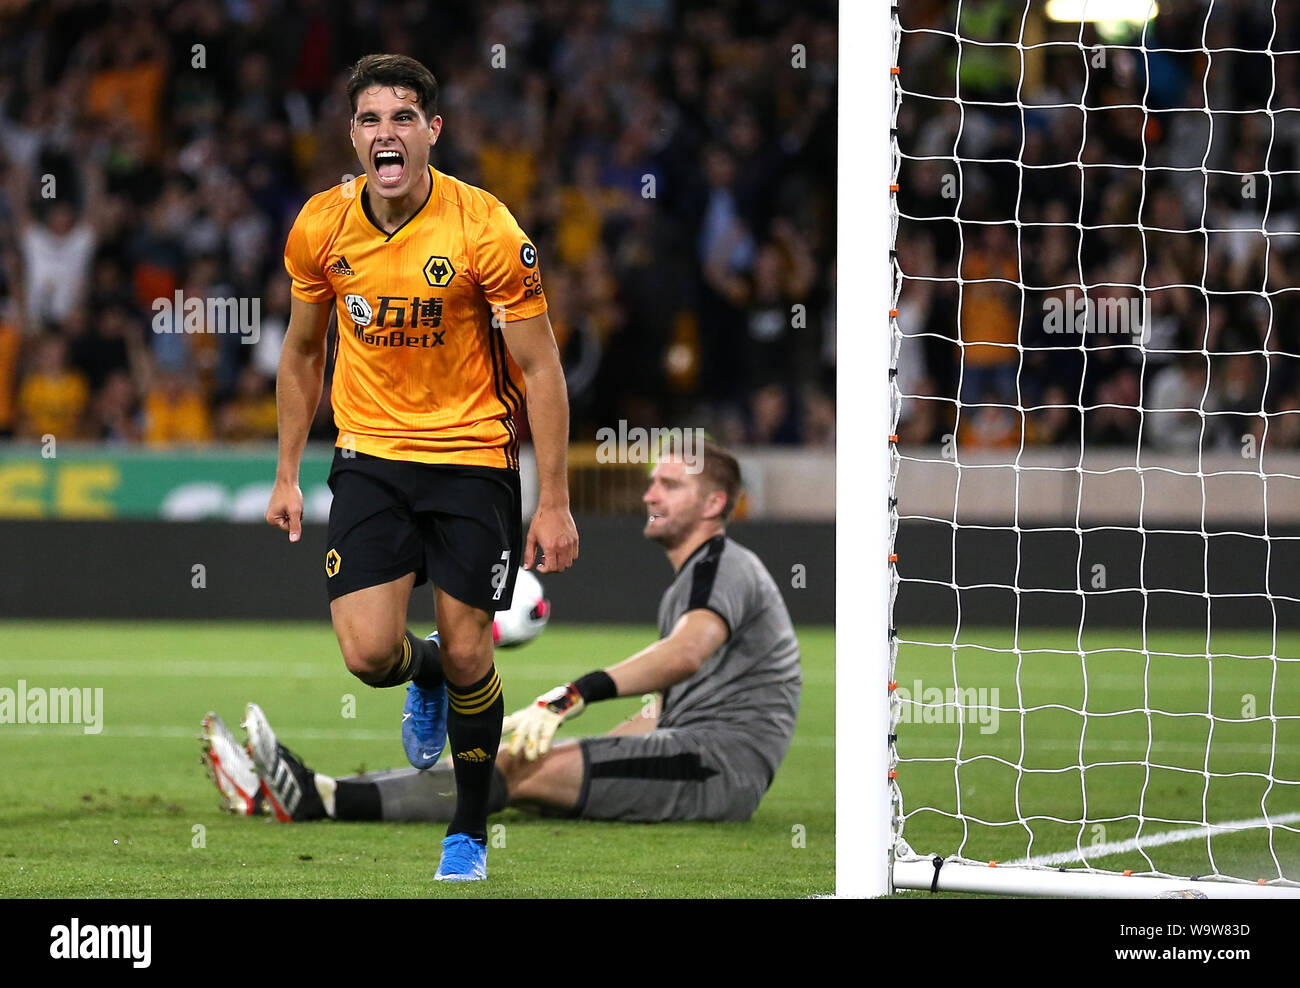 Wolverhampton Wanderers' Lomba Pedro Neto celebrates scoring his side's first goal of the game during the UEFA Europa League Third Qualifying Round Second Leg match at Molineux Stadium, Wolverhampton. Stock Photo